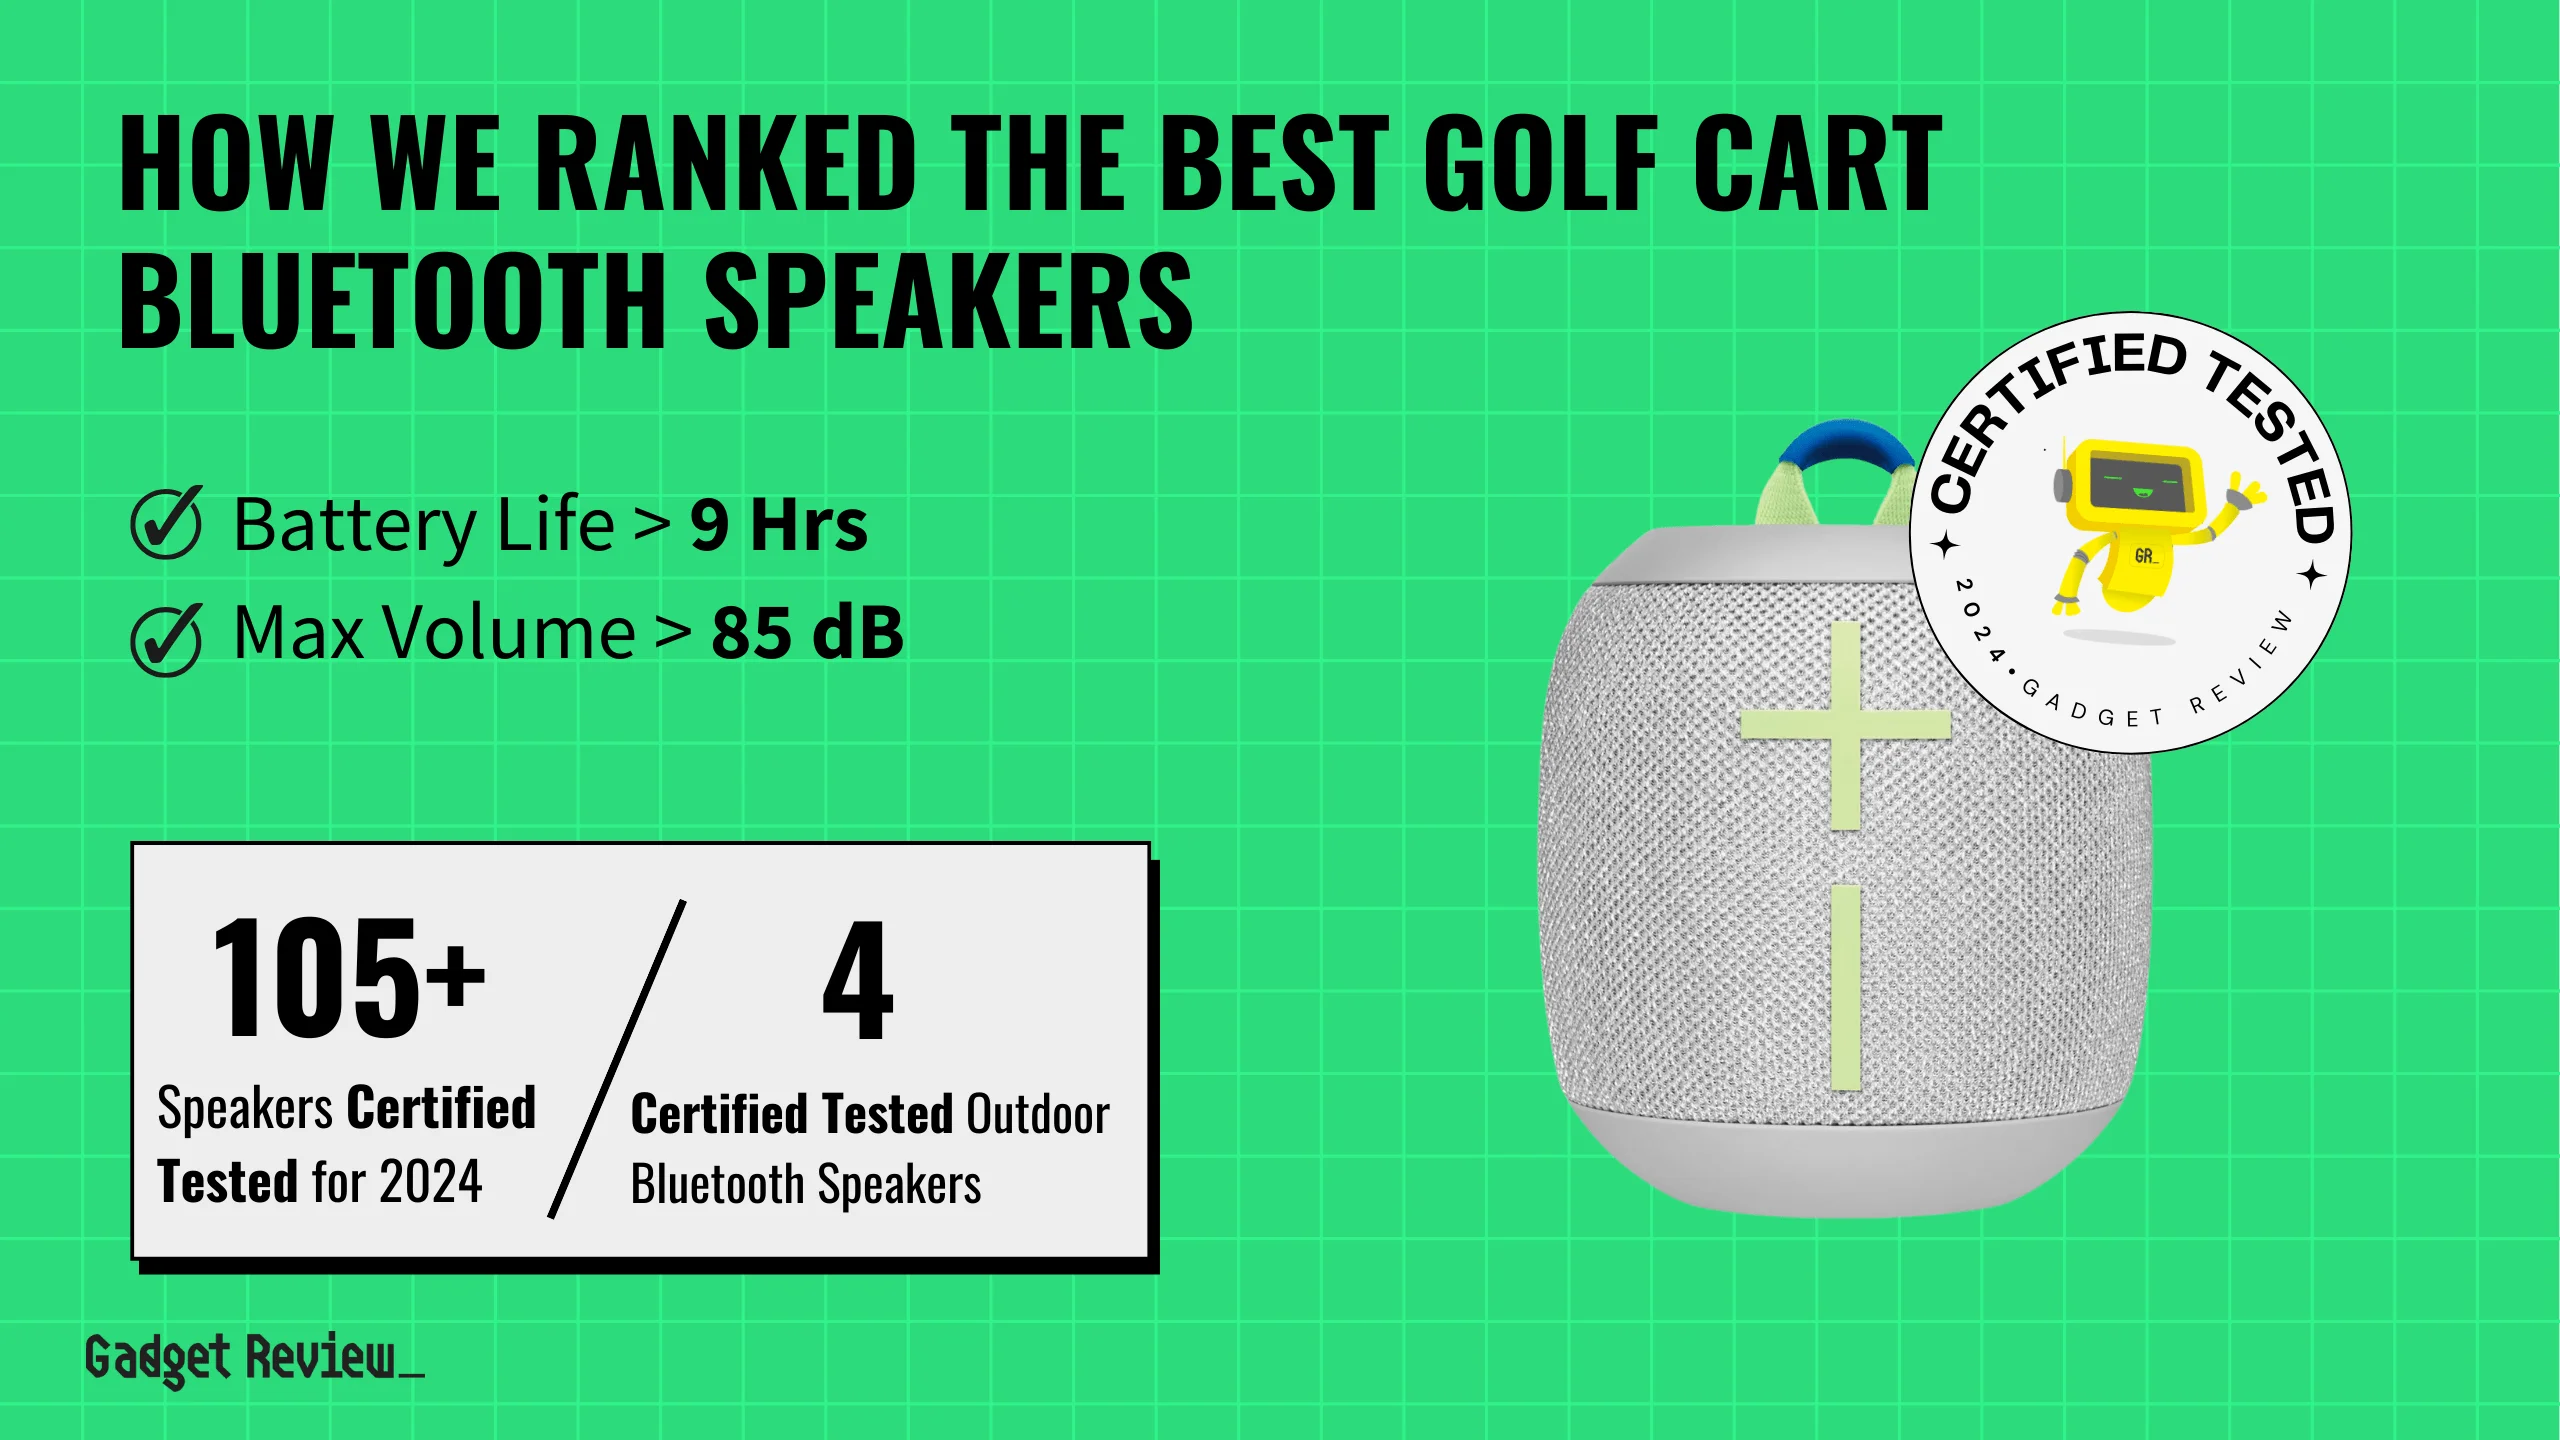 best golf cart bluetooth speakers guide that shows the top best bluetooth speaker model